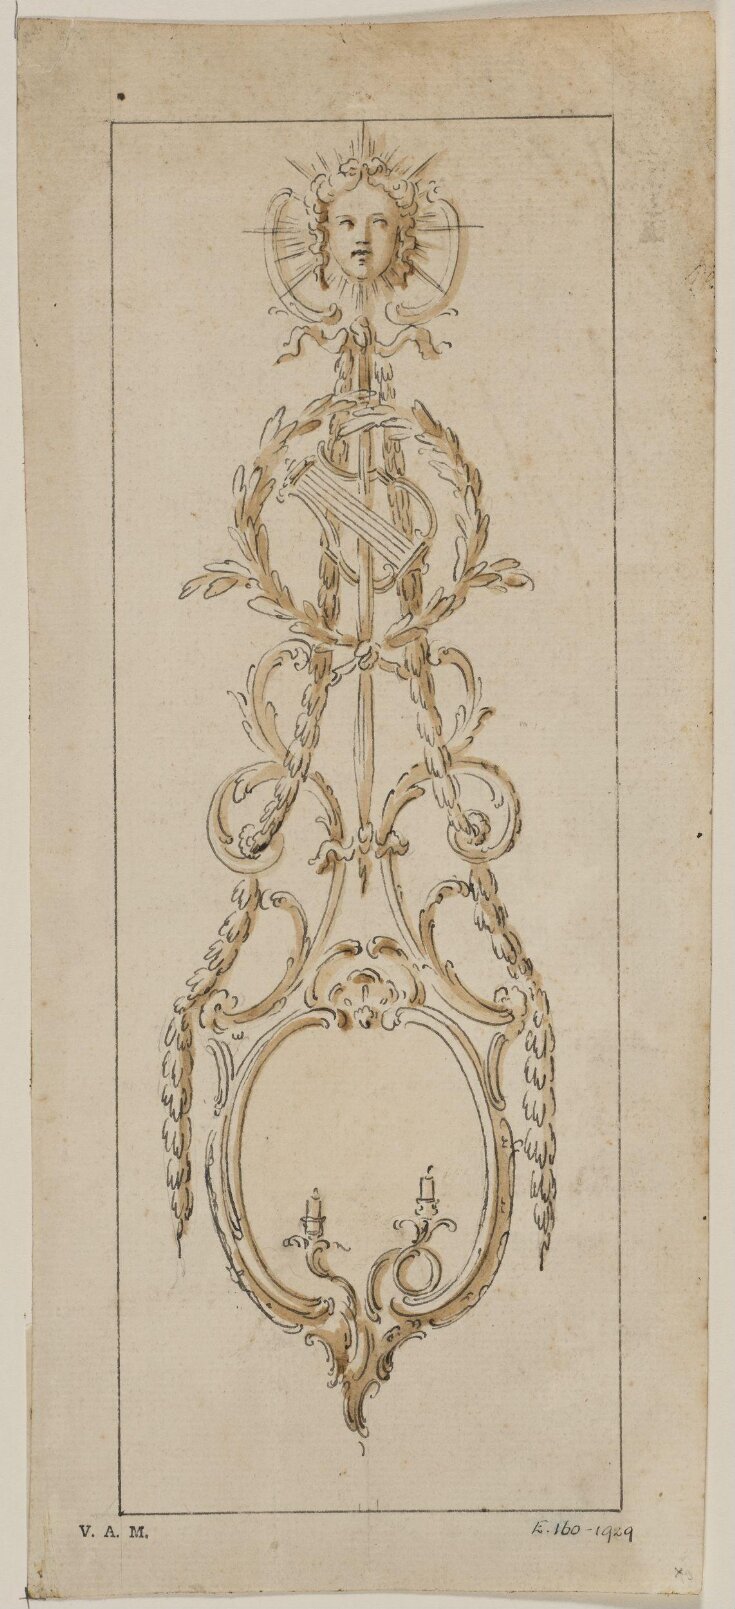 Design for a sconce with the mask of Apollo from; A Miscellaneous Collection of Original Designs, made, and for the most part executed, during an extensive Practice of many years in the first line of his Profession, by John Linnell, Upholsterer Carver & Cabinet Maker. Selected from his Portfolios at his Decease, by C. H. Tatham Architect. AD 1800. top image